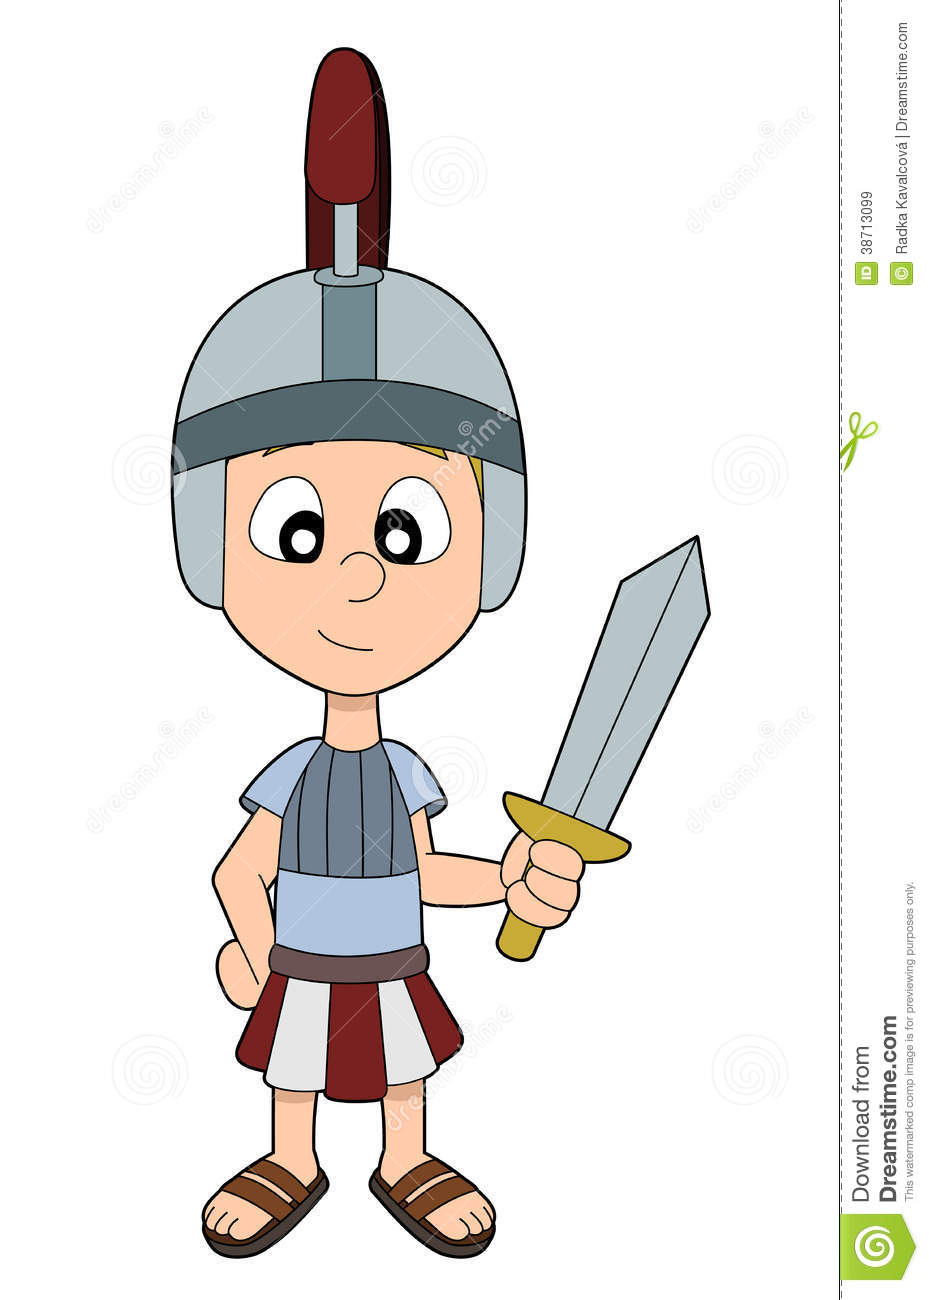 Child Dressed In Roman Legionnaire Costume Holding A Sword Isolated